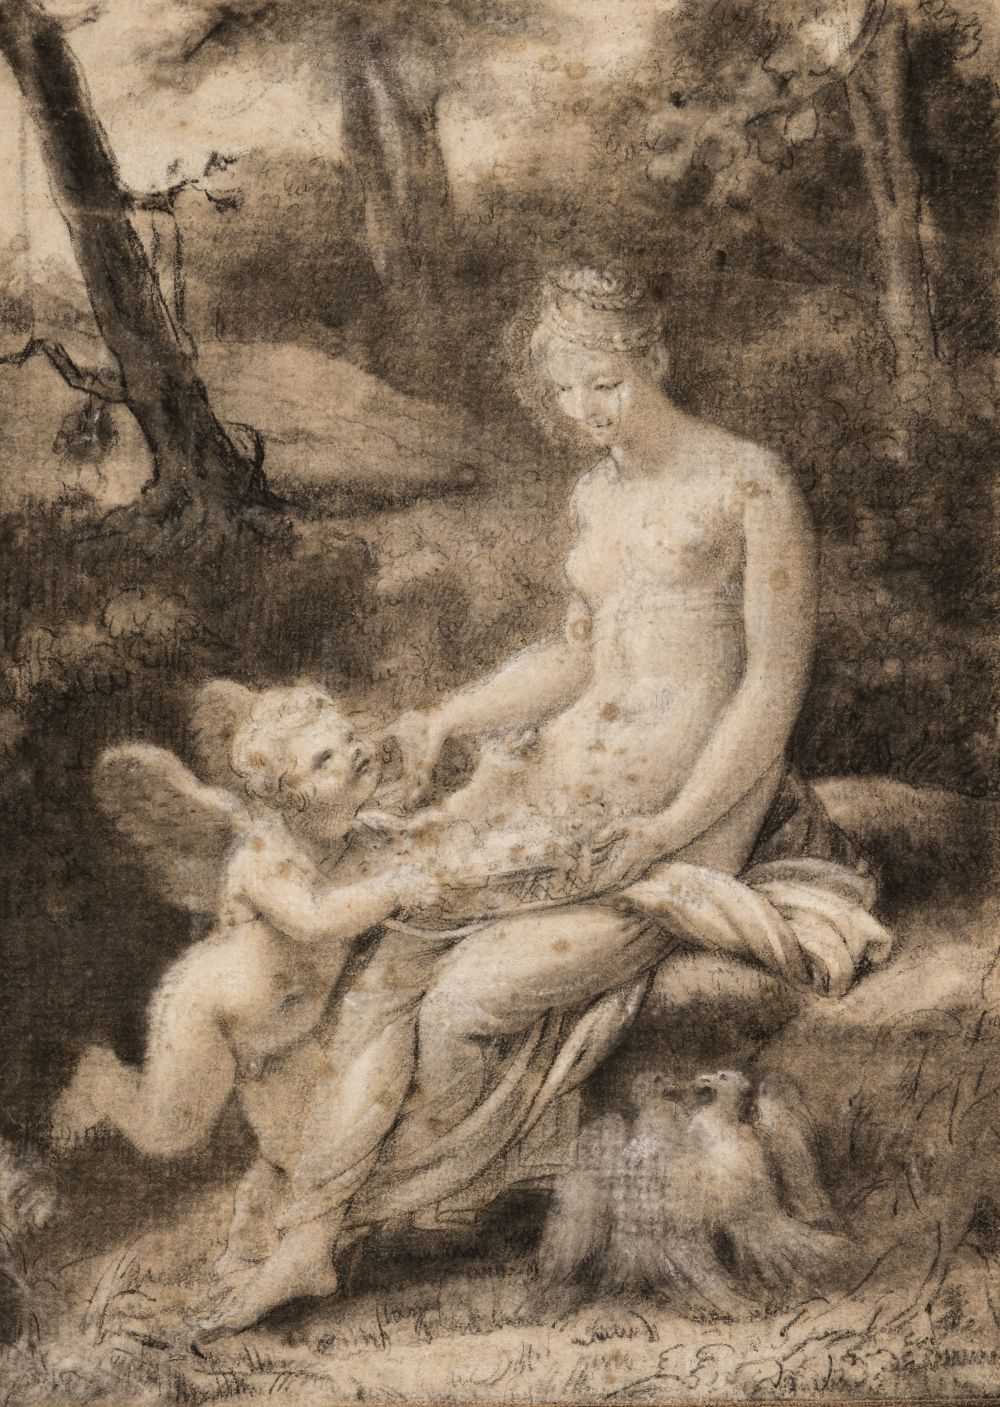 Lot 26 - Prud'hon (Pierre Paul, 1758-1823). Cupid and Psyche